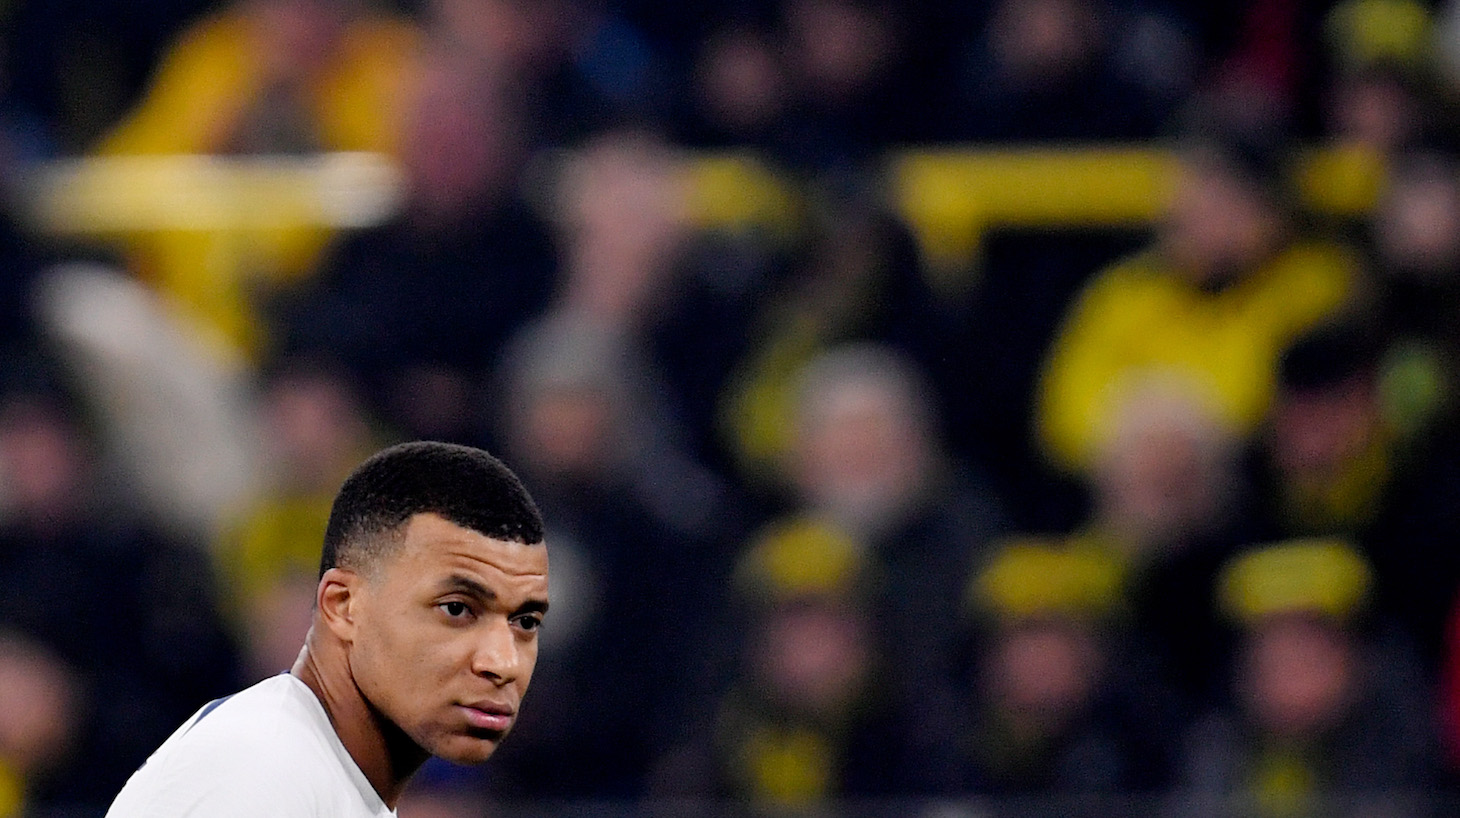 Kylian Mbappe of Paris Saint Germain during the UEFA Champions League match between Borussia Dortmund v Paris Saint Germain at the Signal Iduna Park on December 13, 2023 in Dortmund Germany